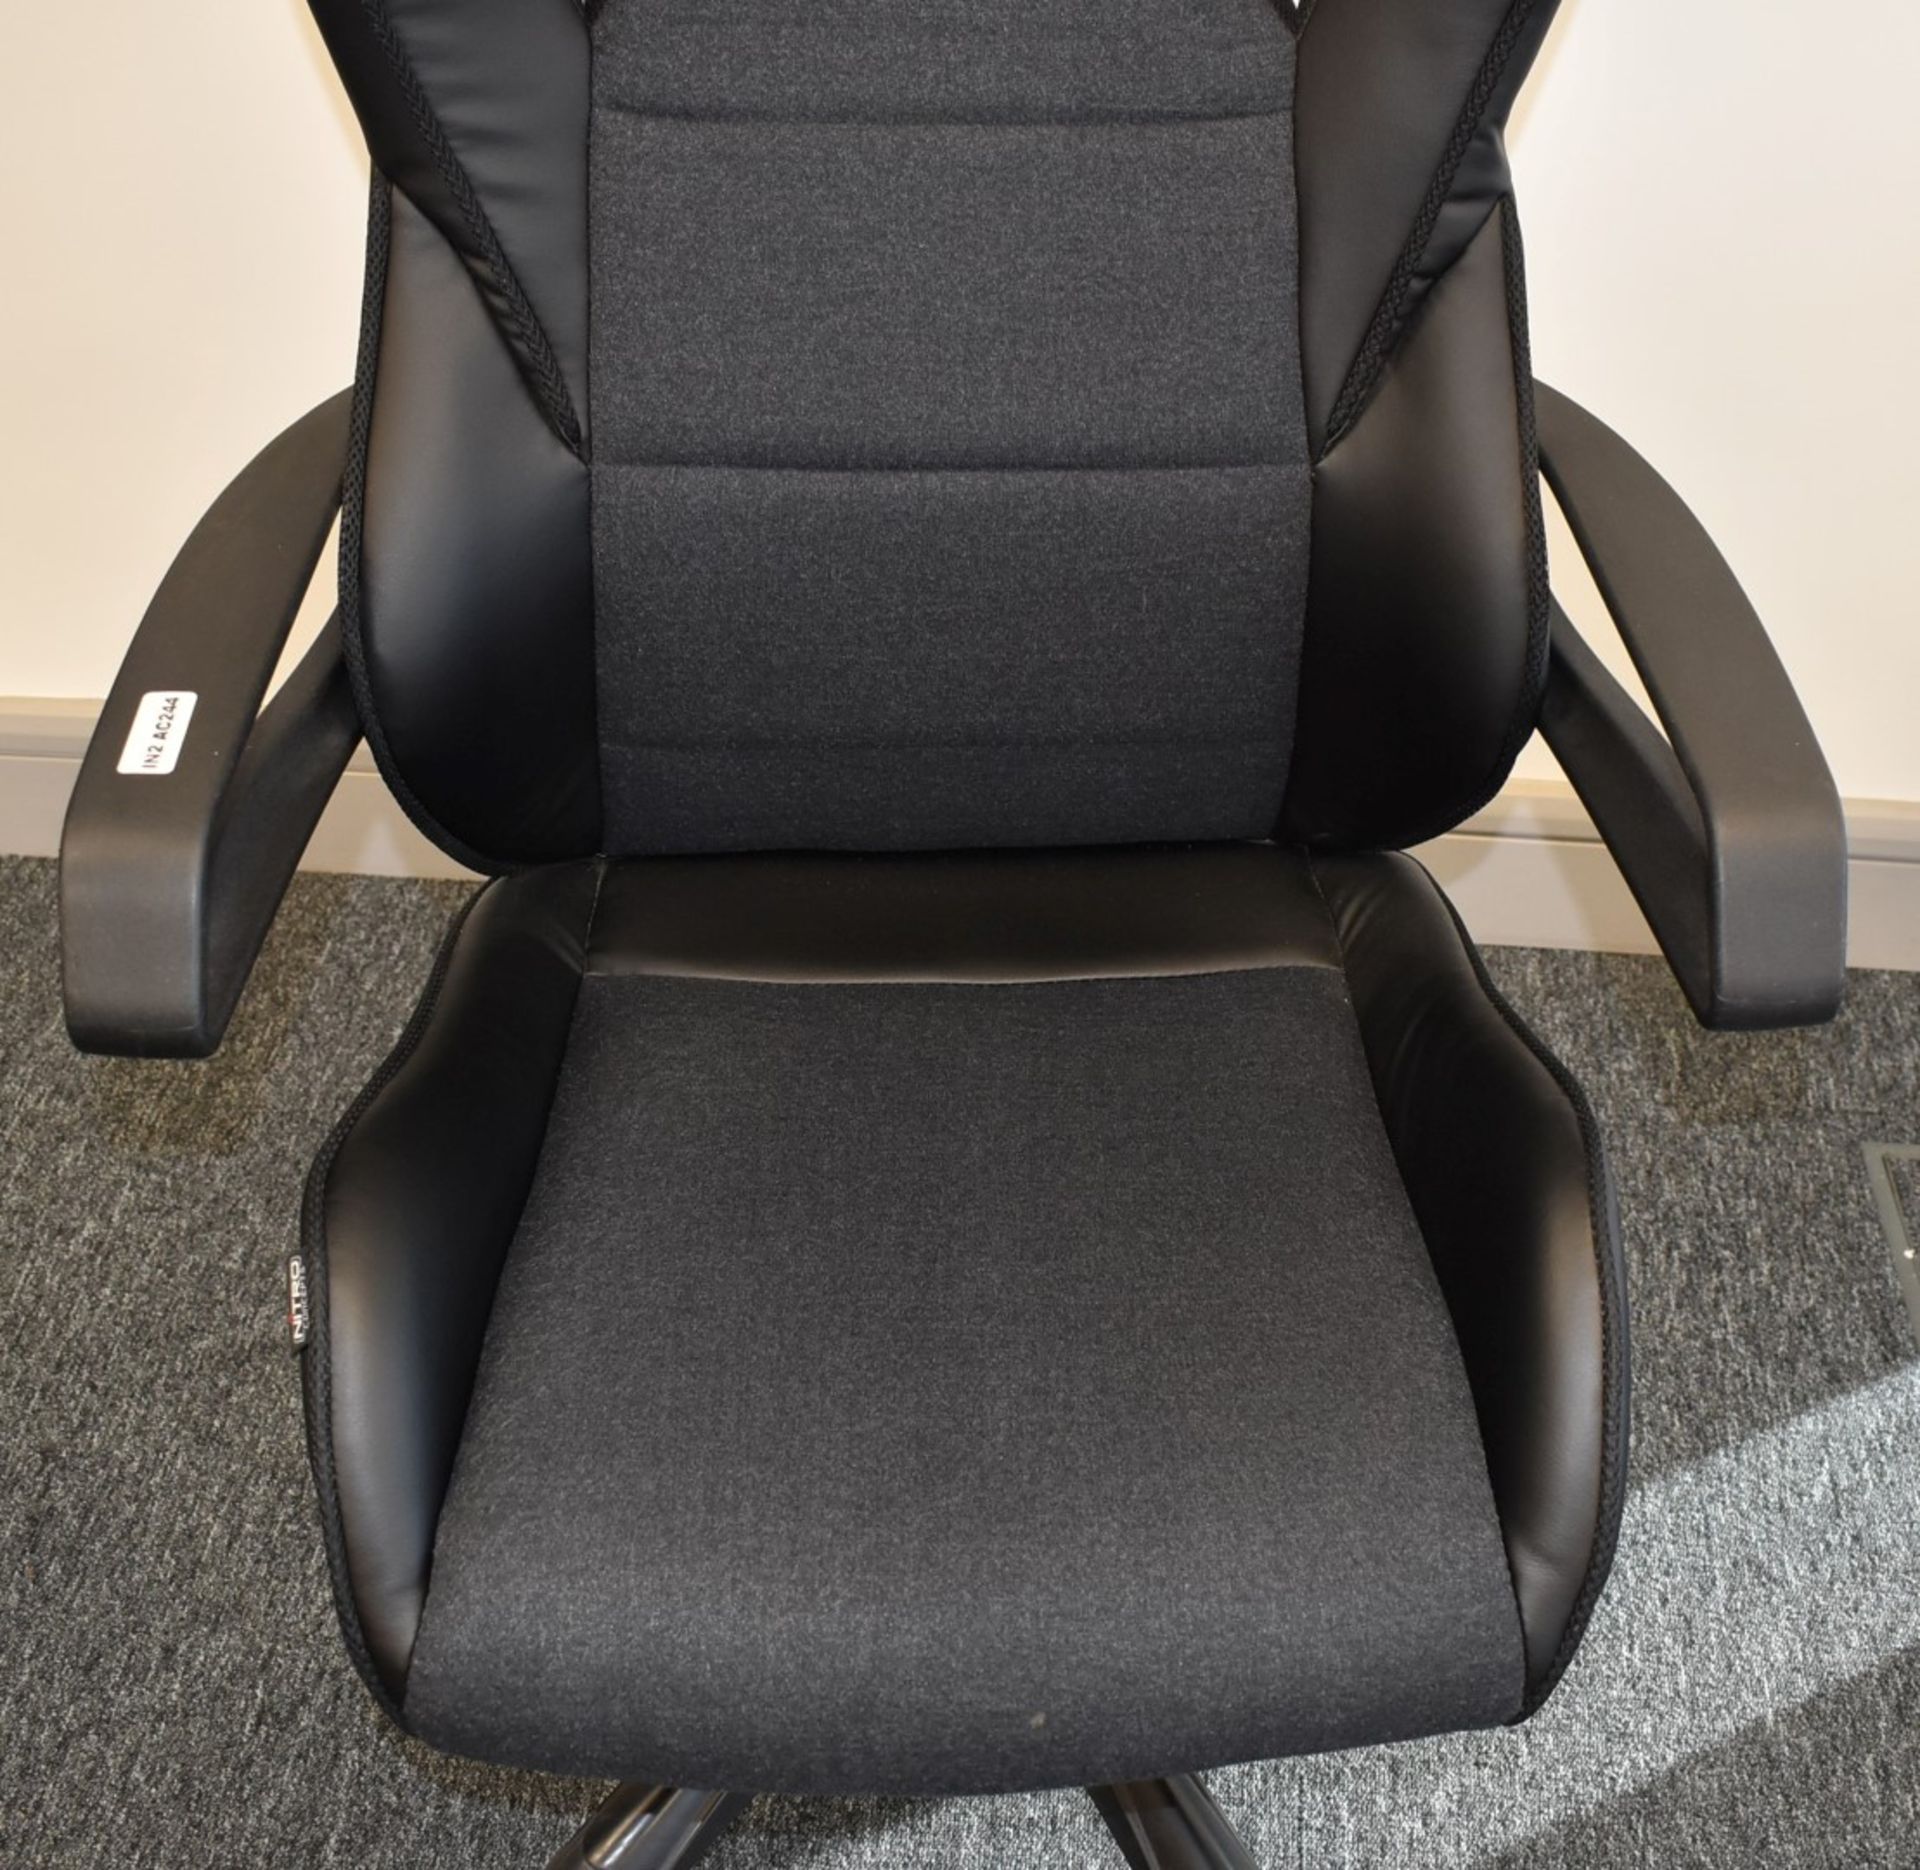 1 x Nitro Concepts Evo Gaming Swivel Chair - Faux Leather and Fabric Upholstery in Black - Gas - Image 4 of 8